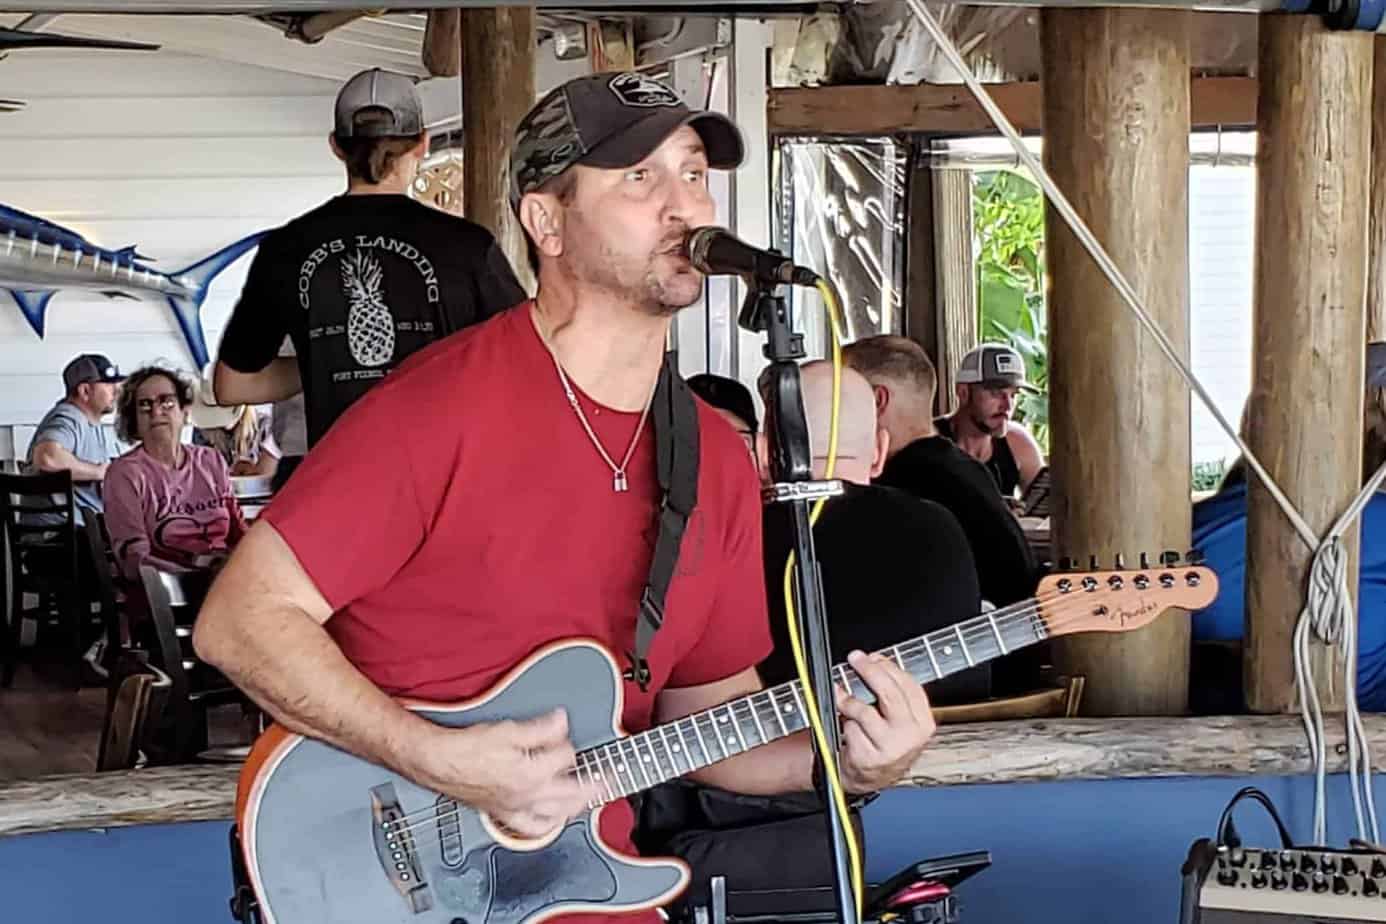 Jeff Fereshetian at the Thirsty Turtle Fort Pierce